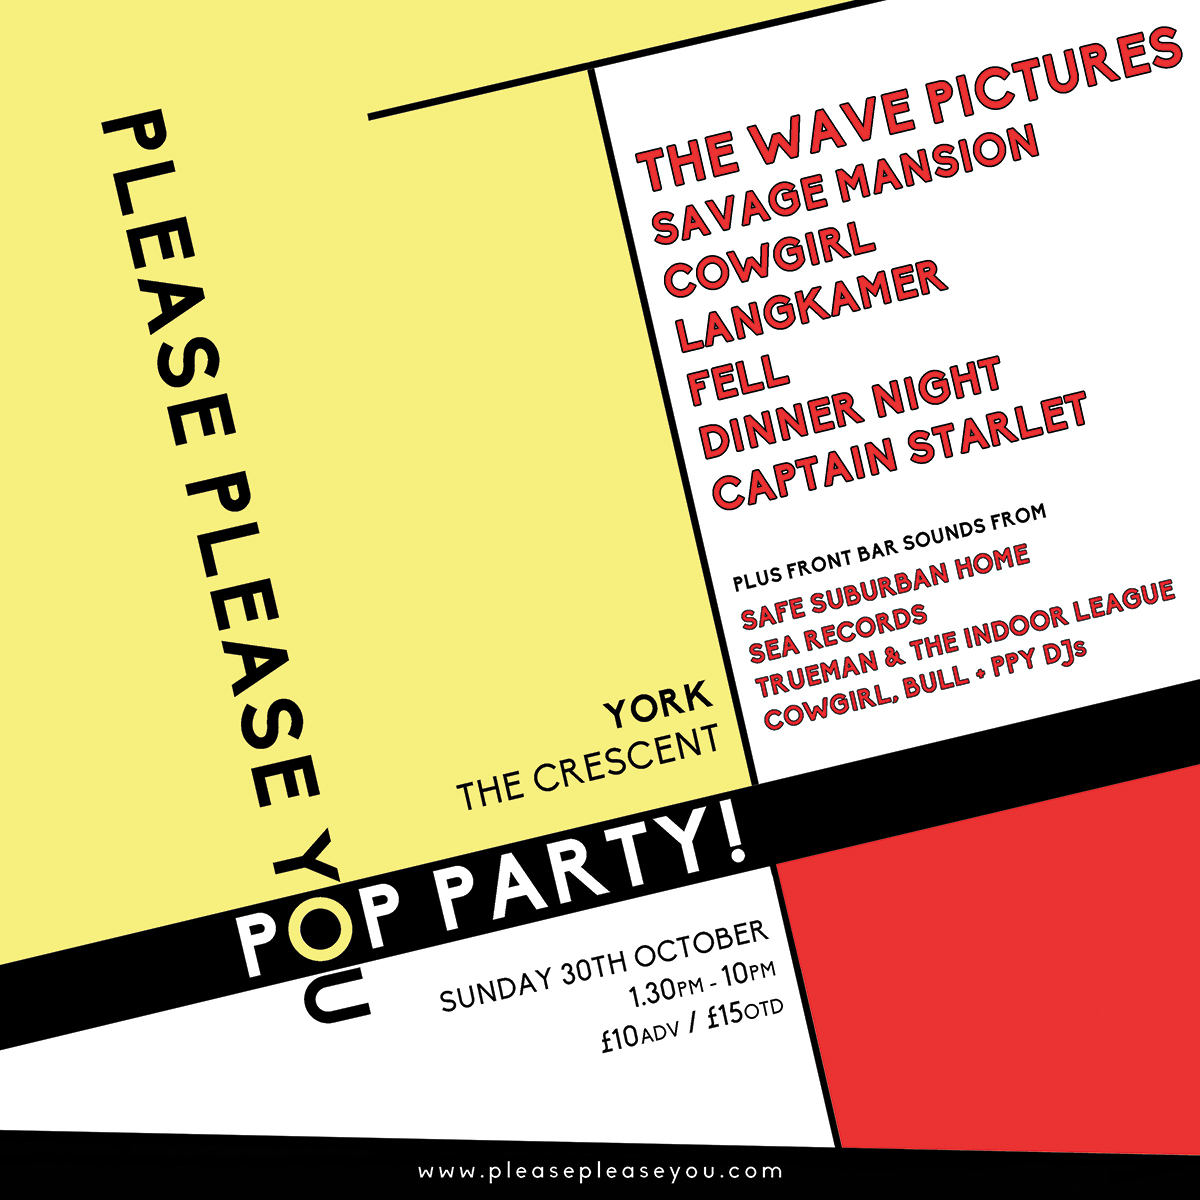 It's our big party in York this Sunday! @TheWavePictures top the revived PPY POP Party with a host of other ace bands and DJs all day in the bar at @TheCrescentYork. A bargain £10adv >> thecrescentyork.com/events Thank you all, let's party!